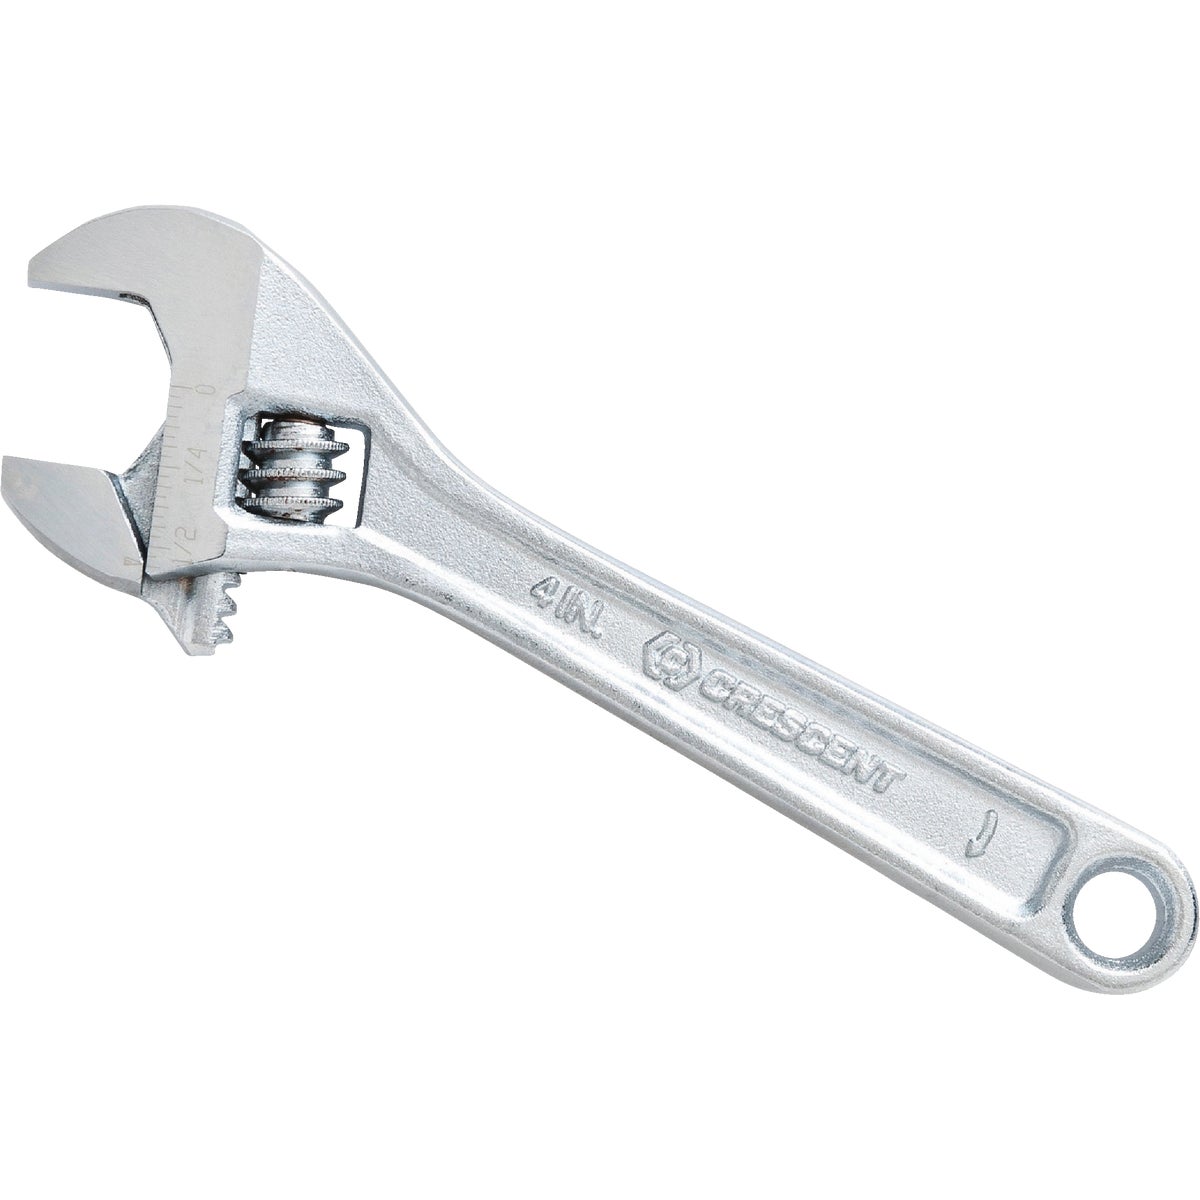 Item 330715, The original adjustable wrench, made by Crescent brand.